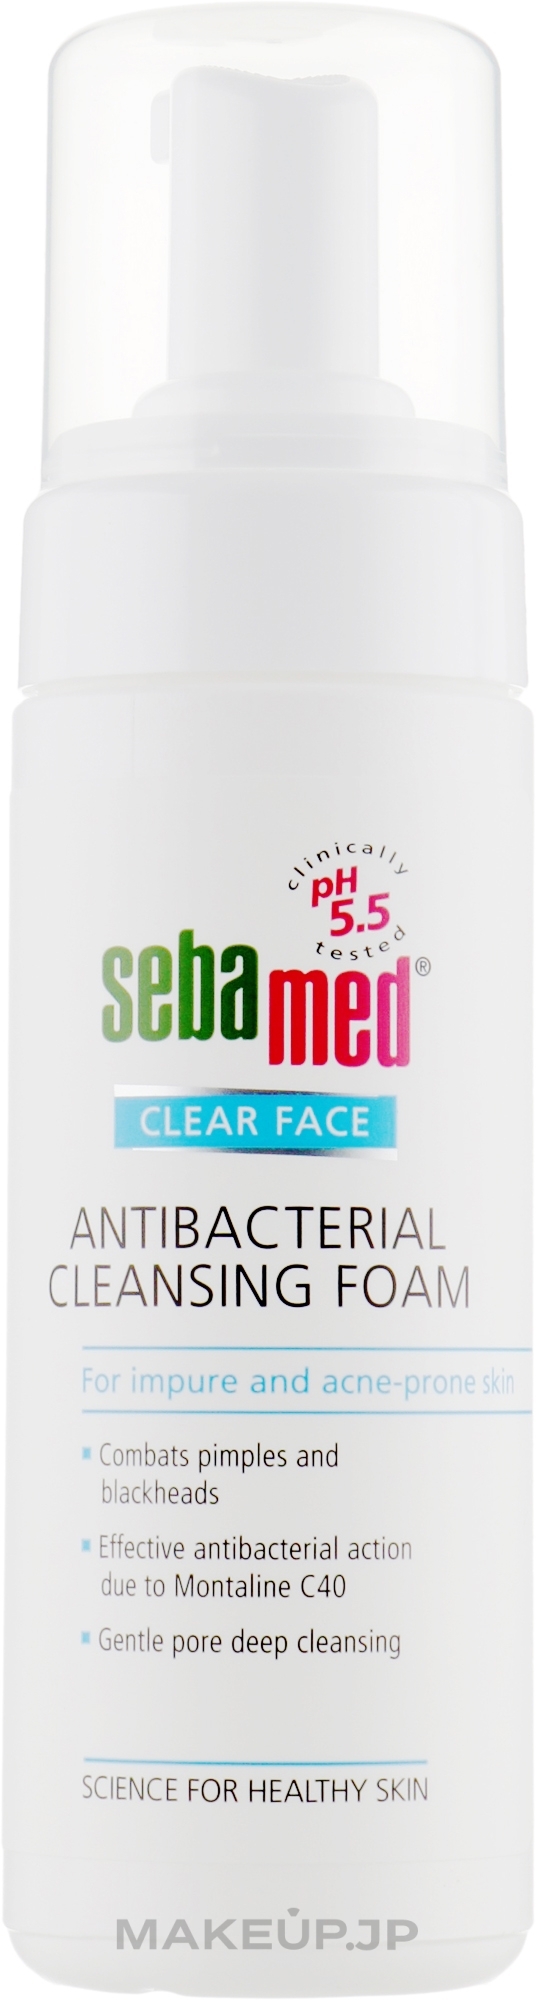 Cleansing Foam for Face - Sebamed Clear Face Antibacterial Cleansing Foam — photo 150 ml